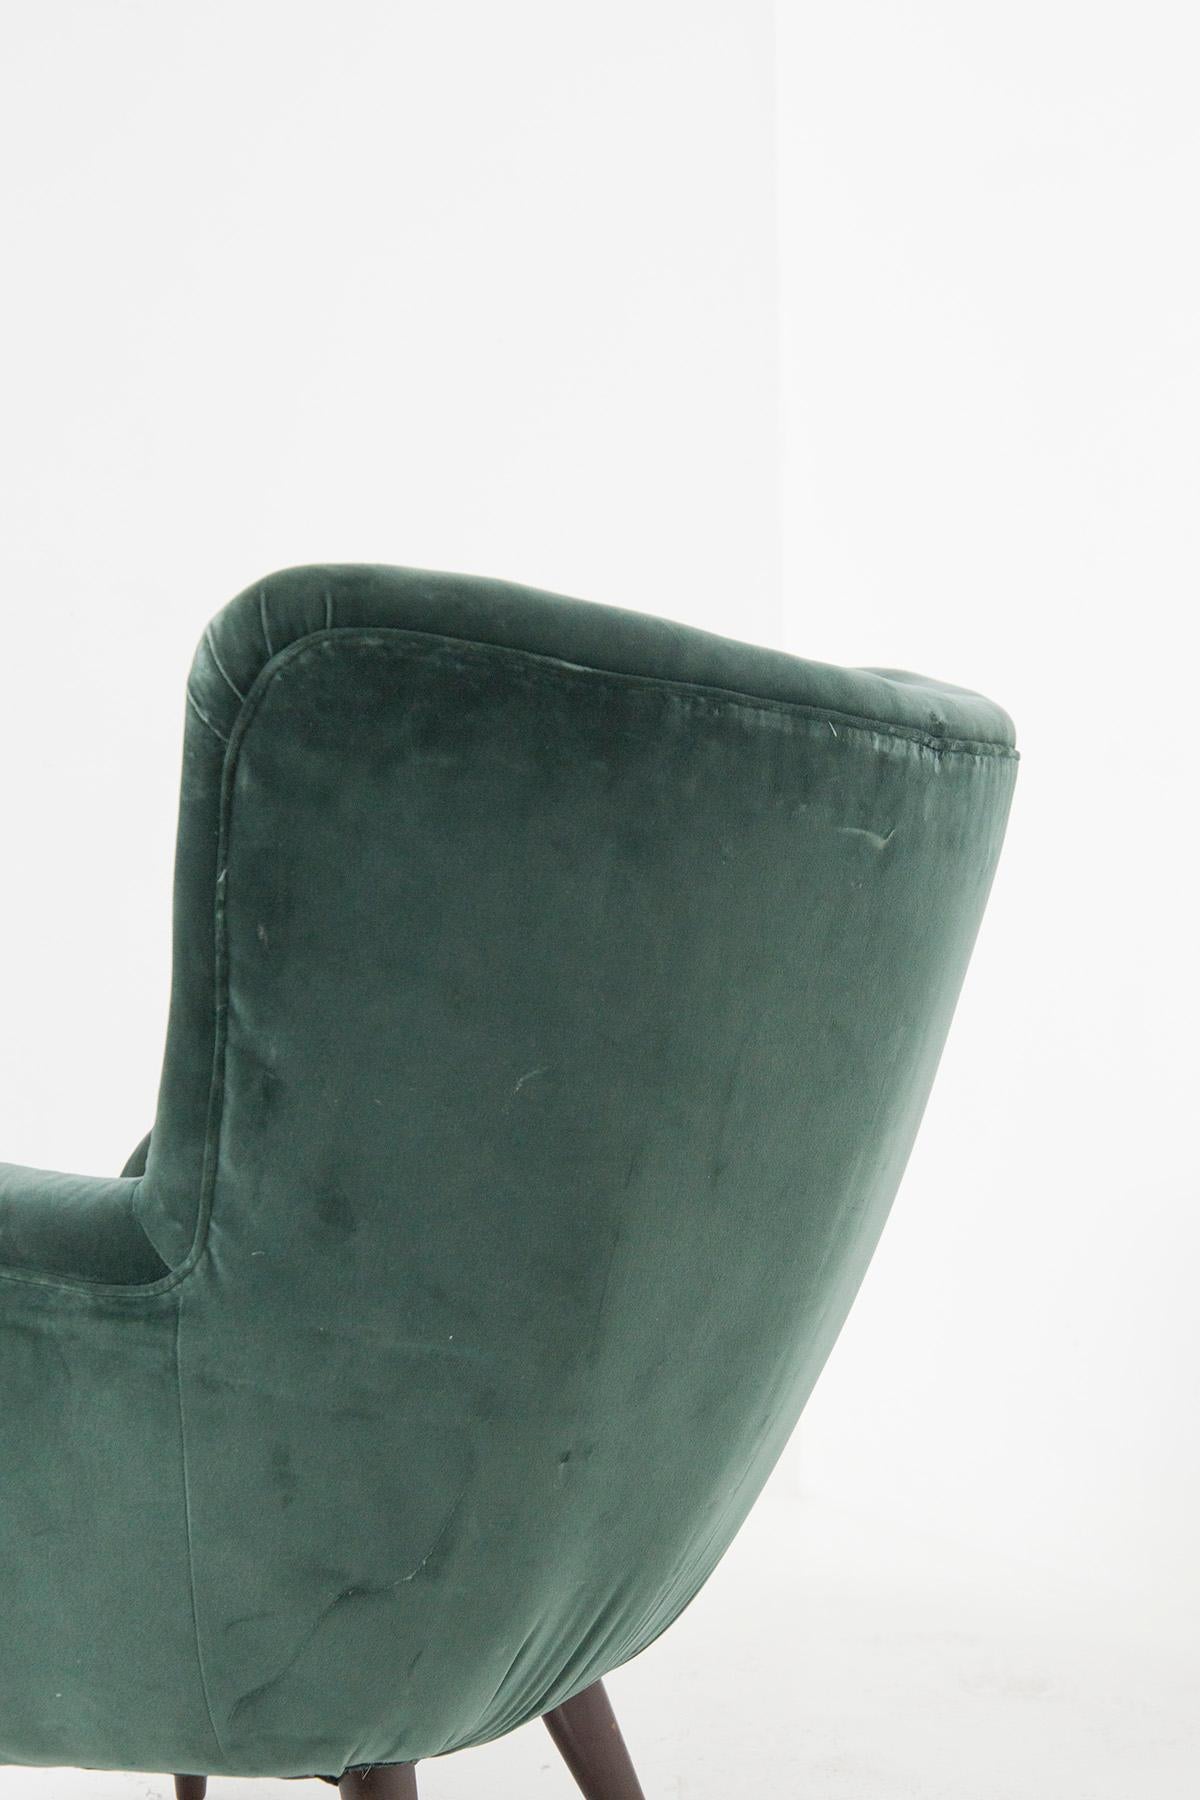 Mid-20th Century Unique Extremely Rare Carlo Mollino Velvet Armchair, Published For Sale